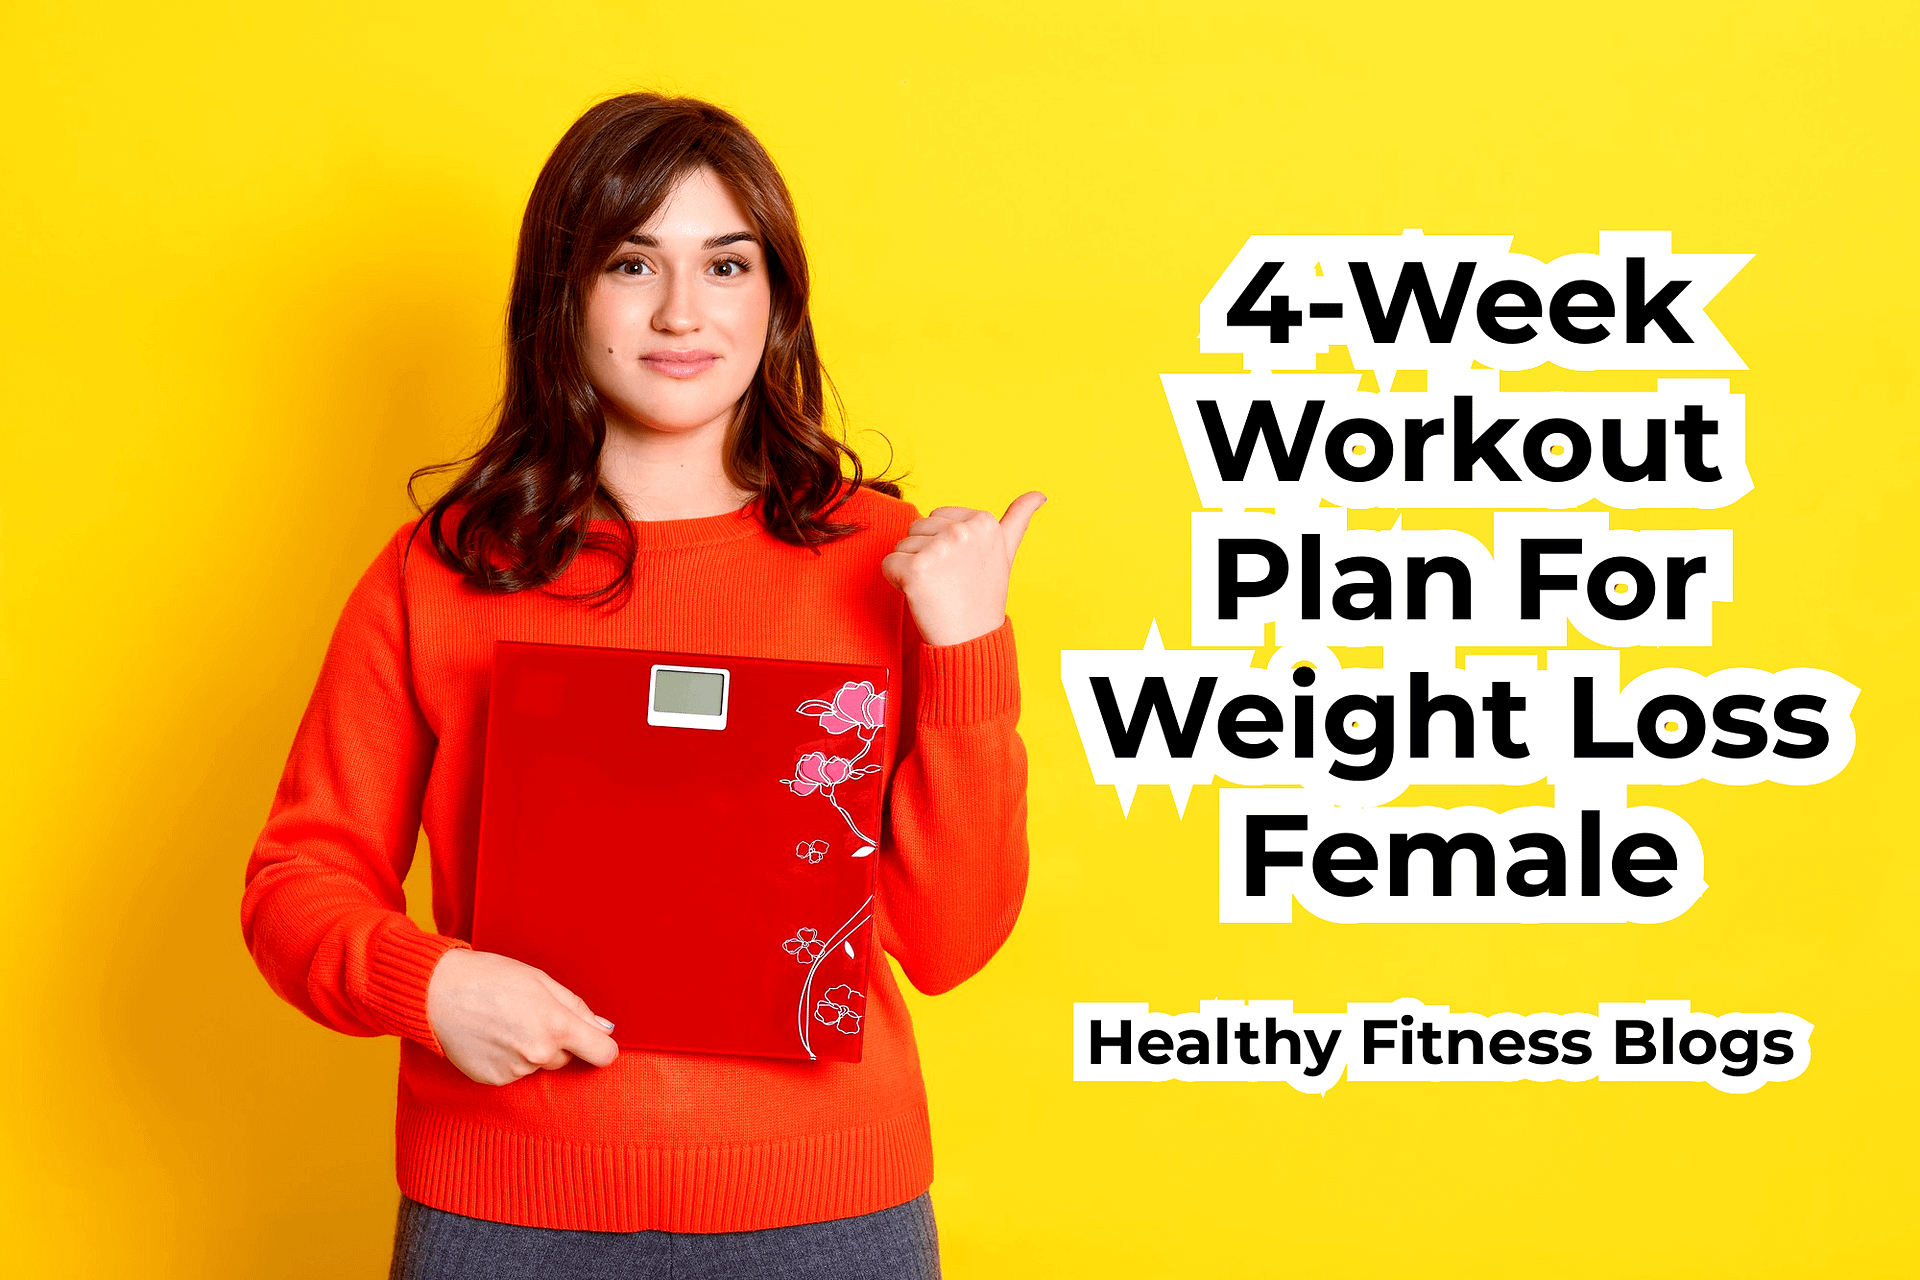 4-week-workout-plan-for-weight-loss-female-healthy-fitness-blogs